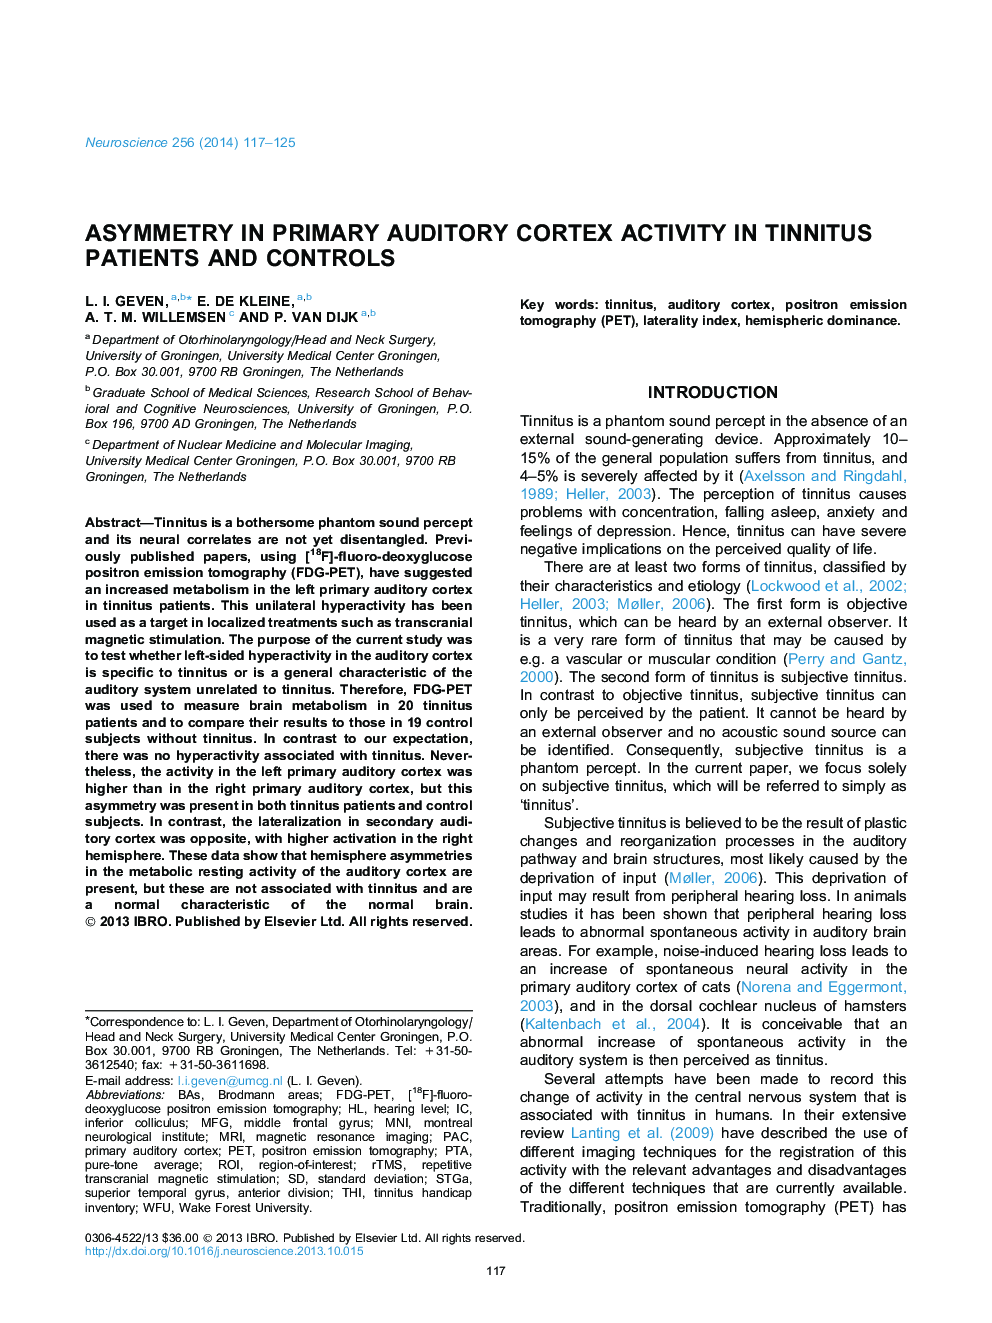 Asymmetry in primary auditory cortex activity in tinnitus patients and controls